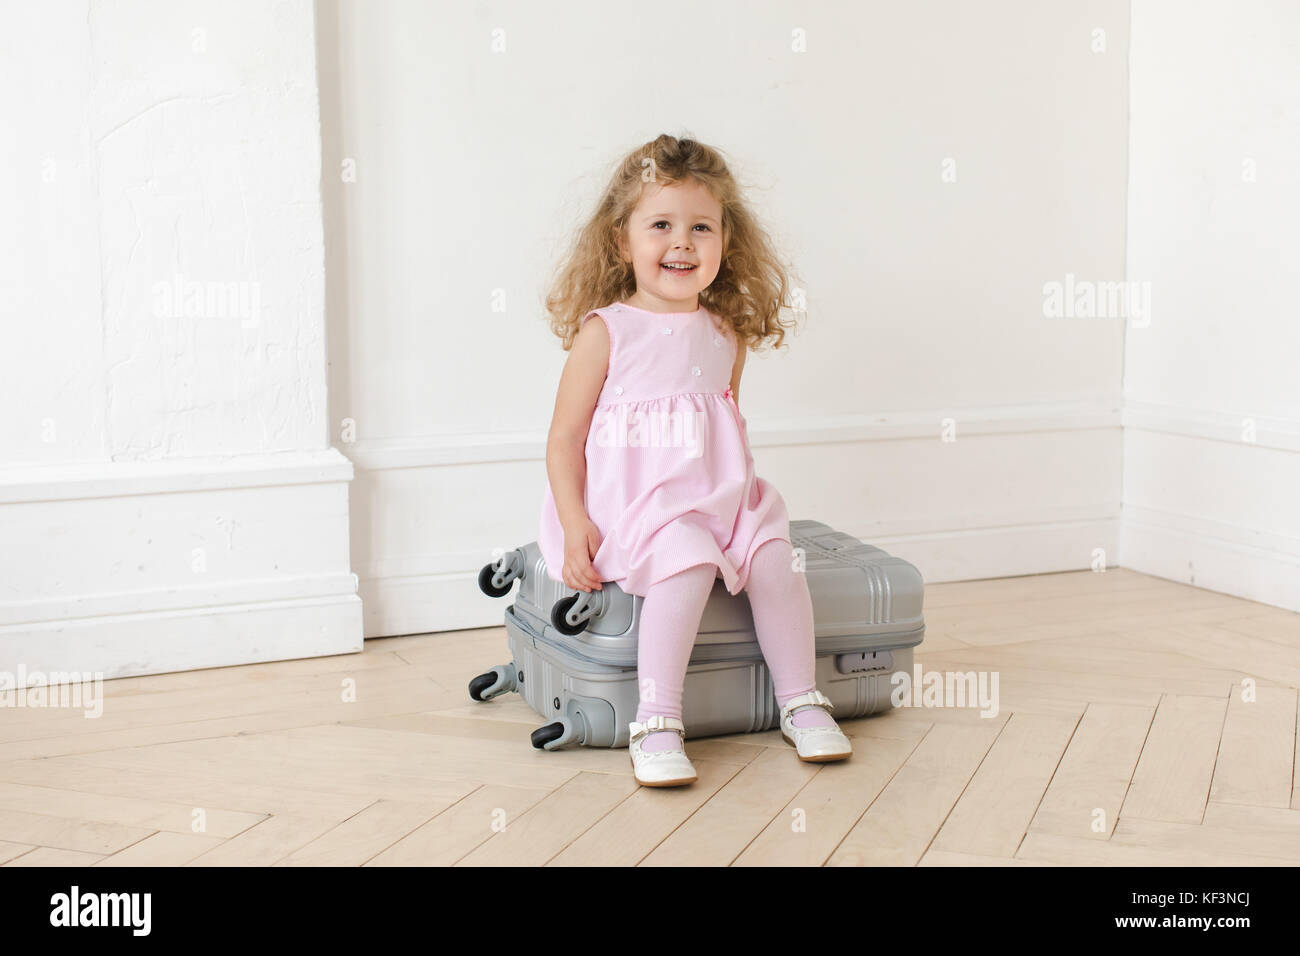 Adorable girl on suitcase in room Stock Photo